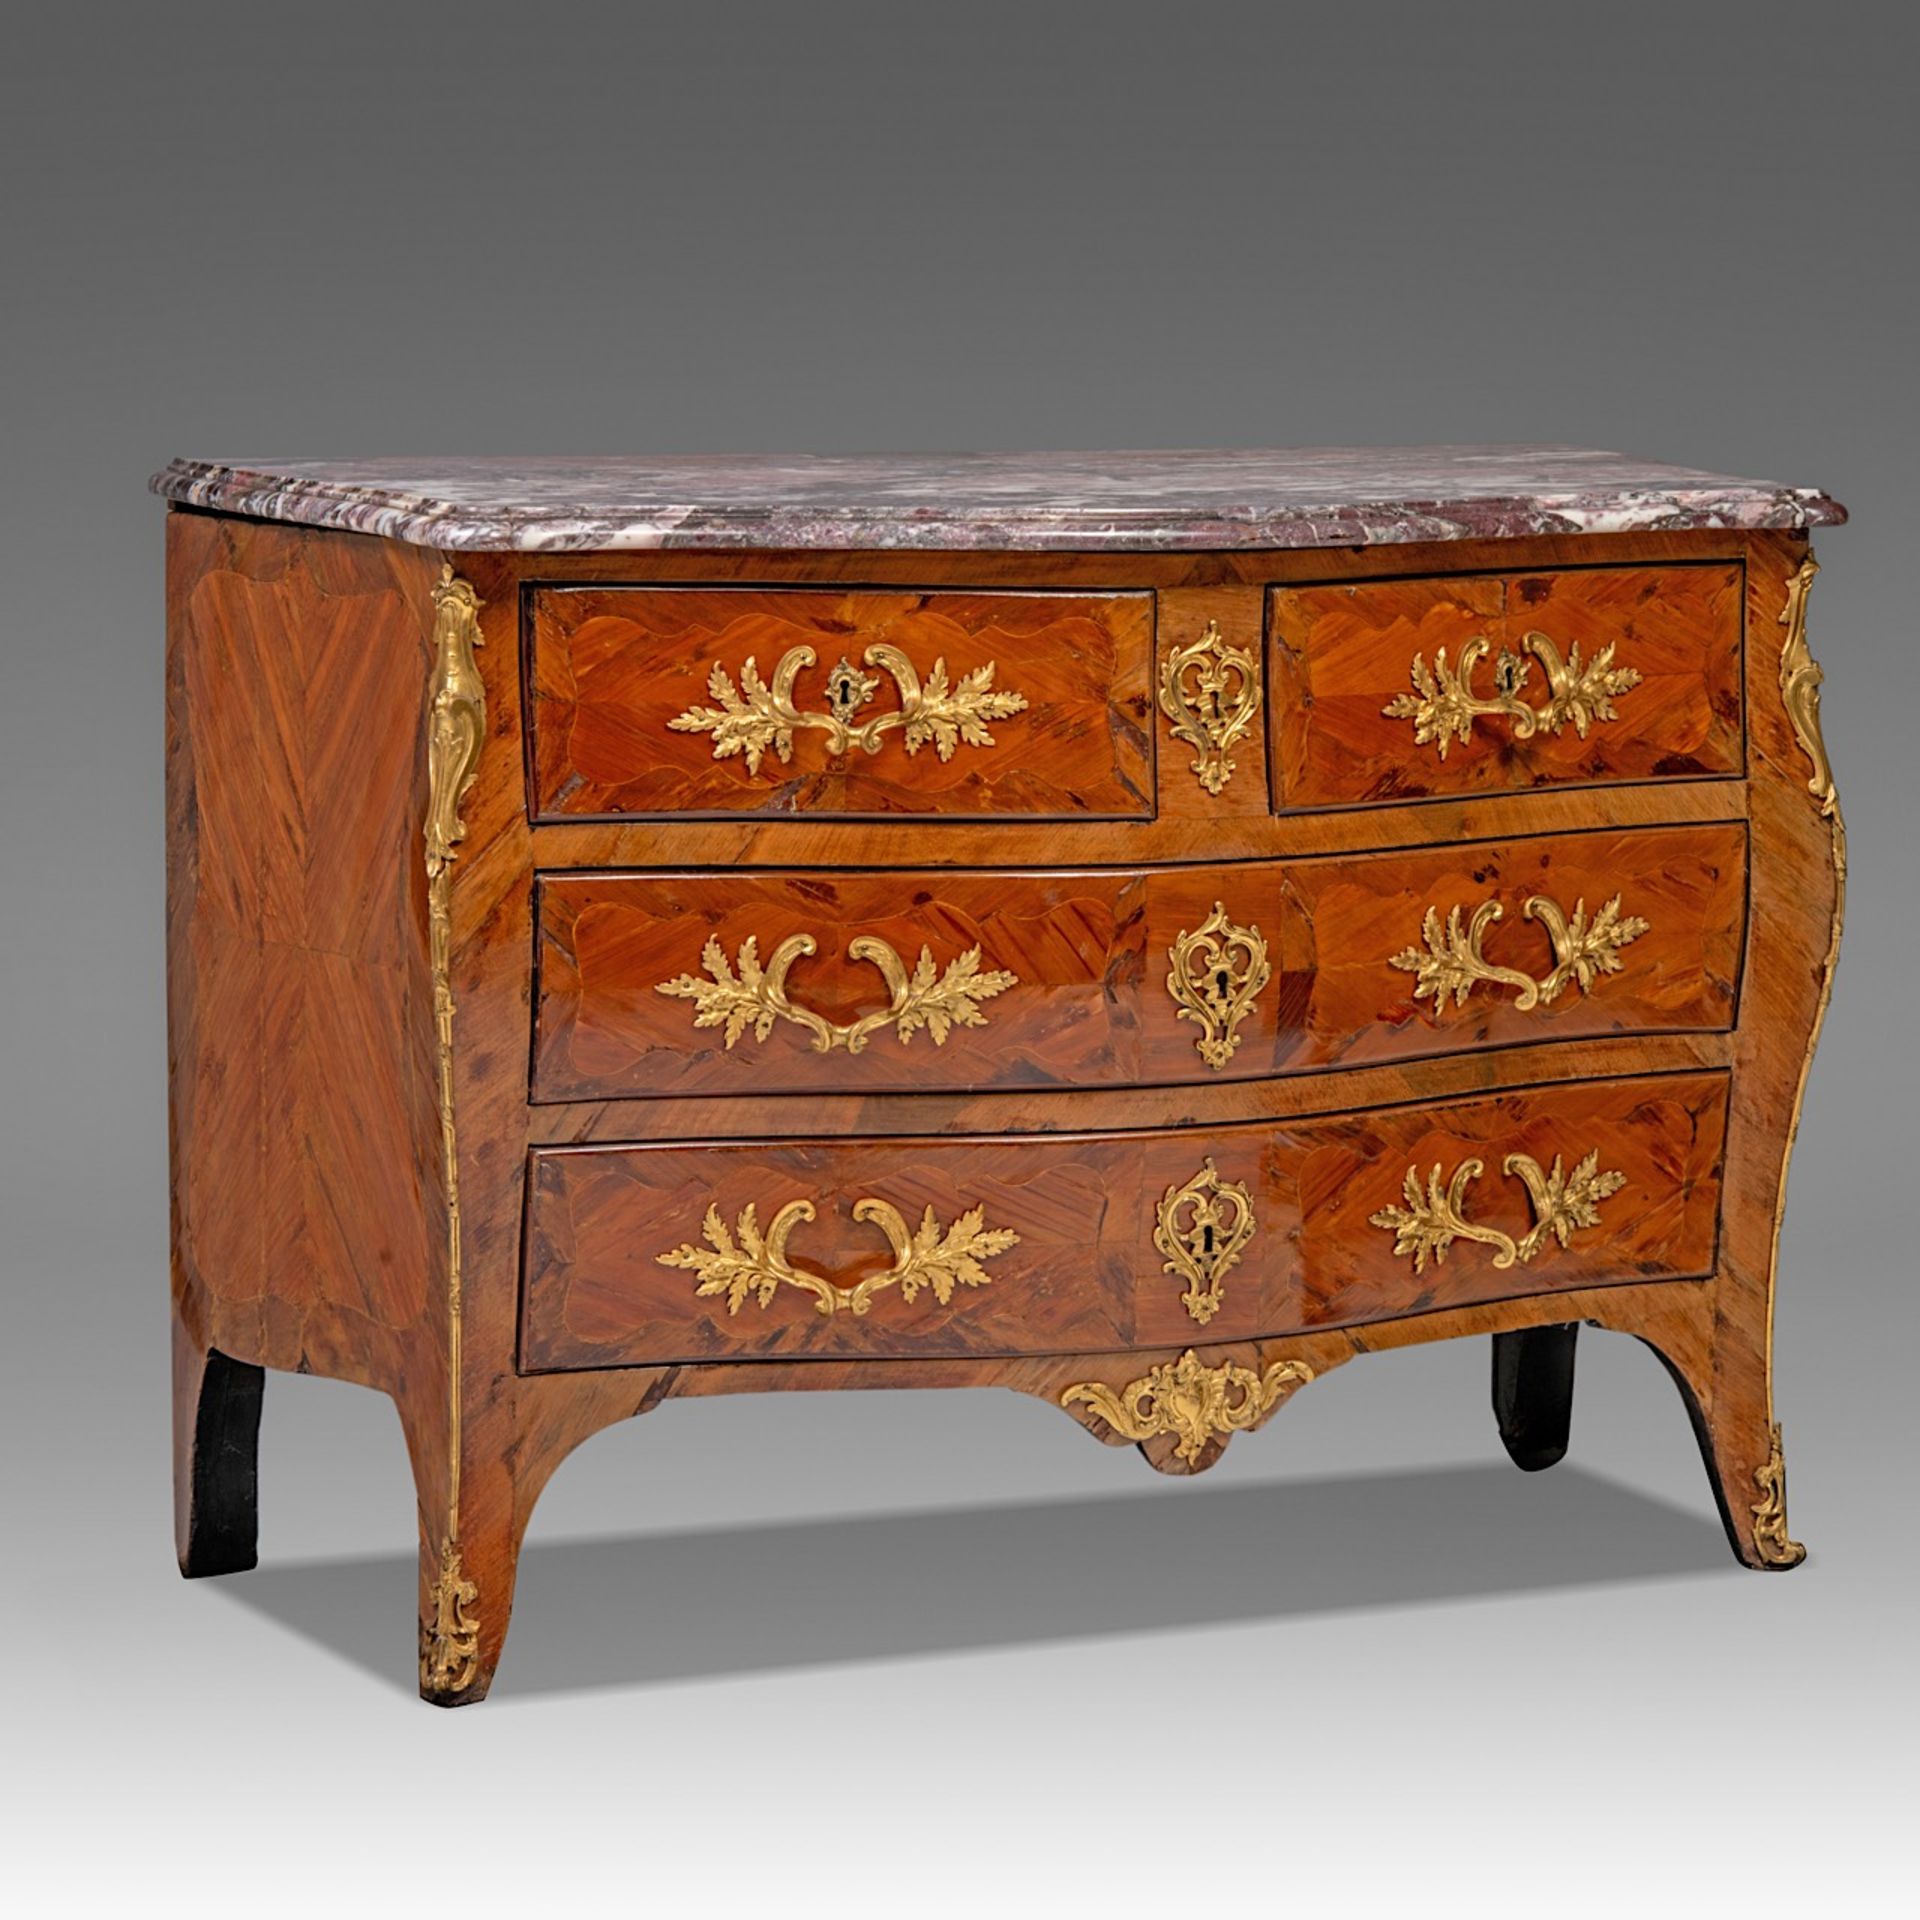 A commode a la Regence with a marble top and gilt bronze mounts, early 18thC, H 88 - W 128 - D 60 cm - Image 5 of 10